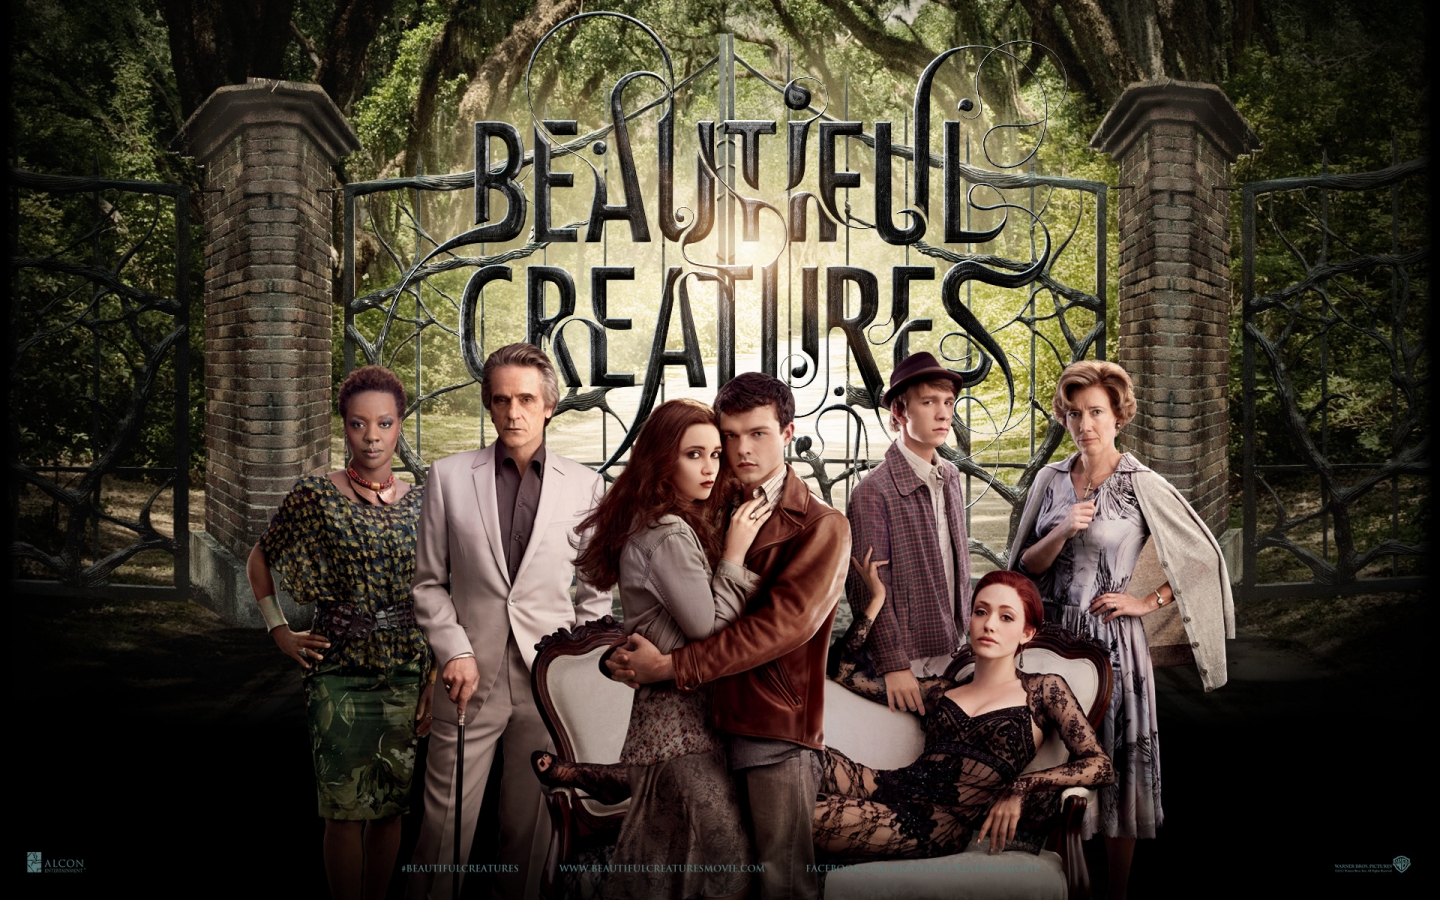 Beautiful Creatures Cast for 1440 x 900 widescreen resolution